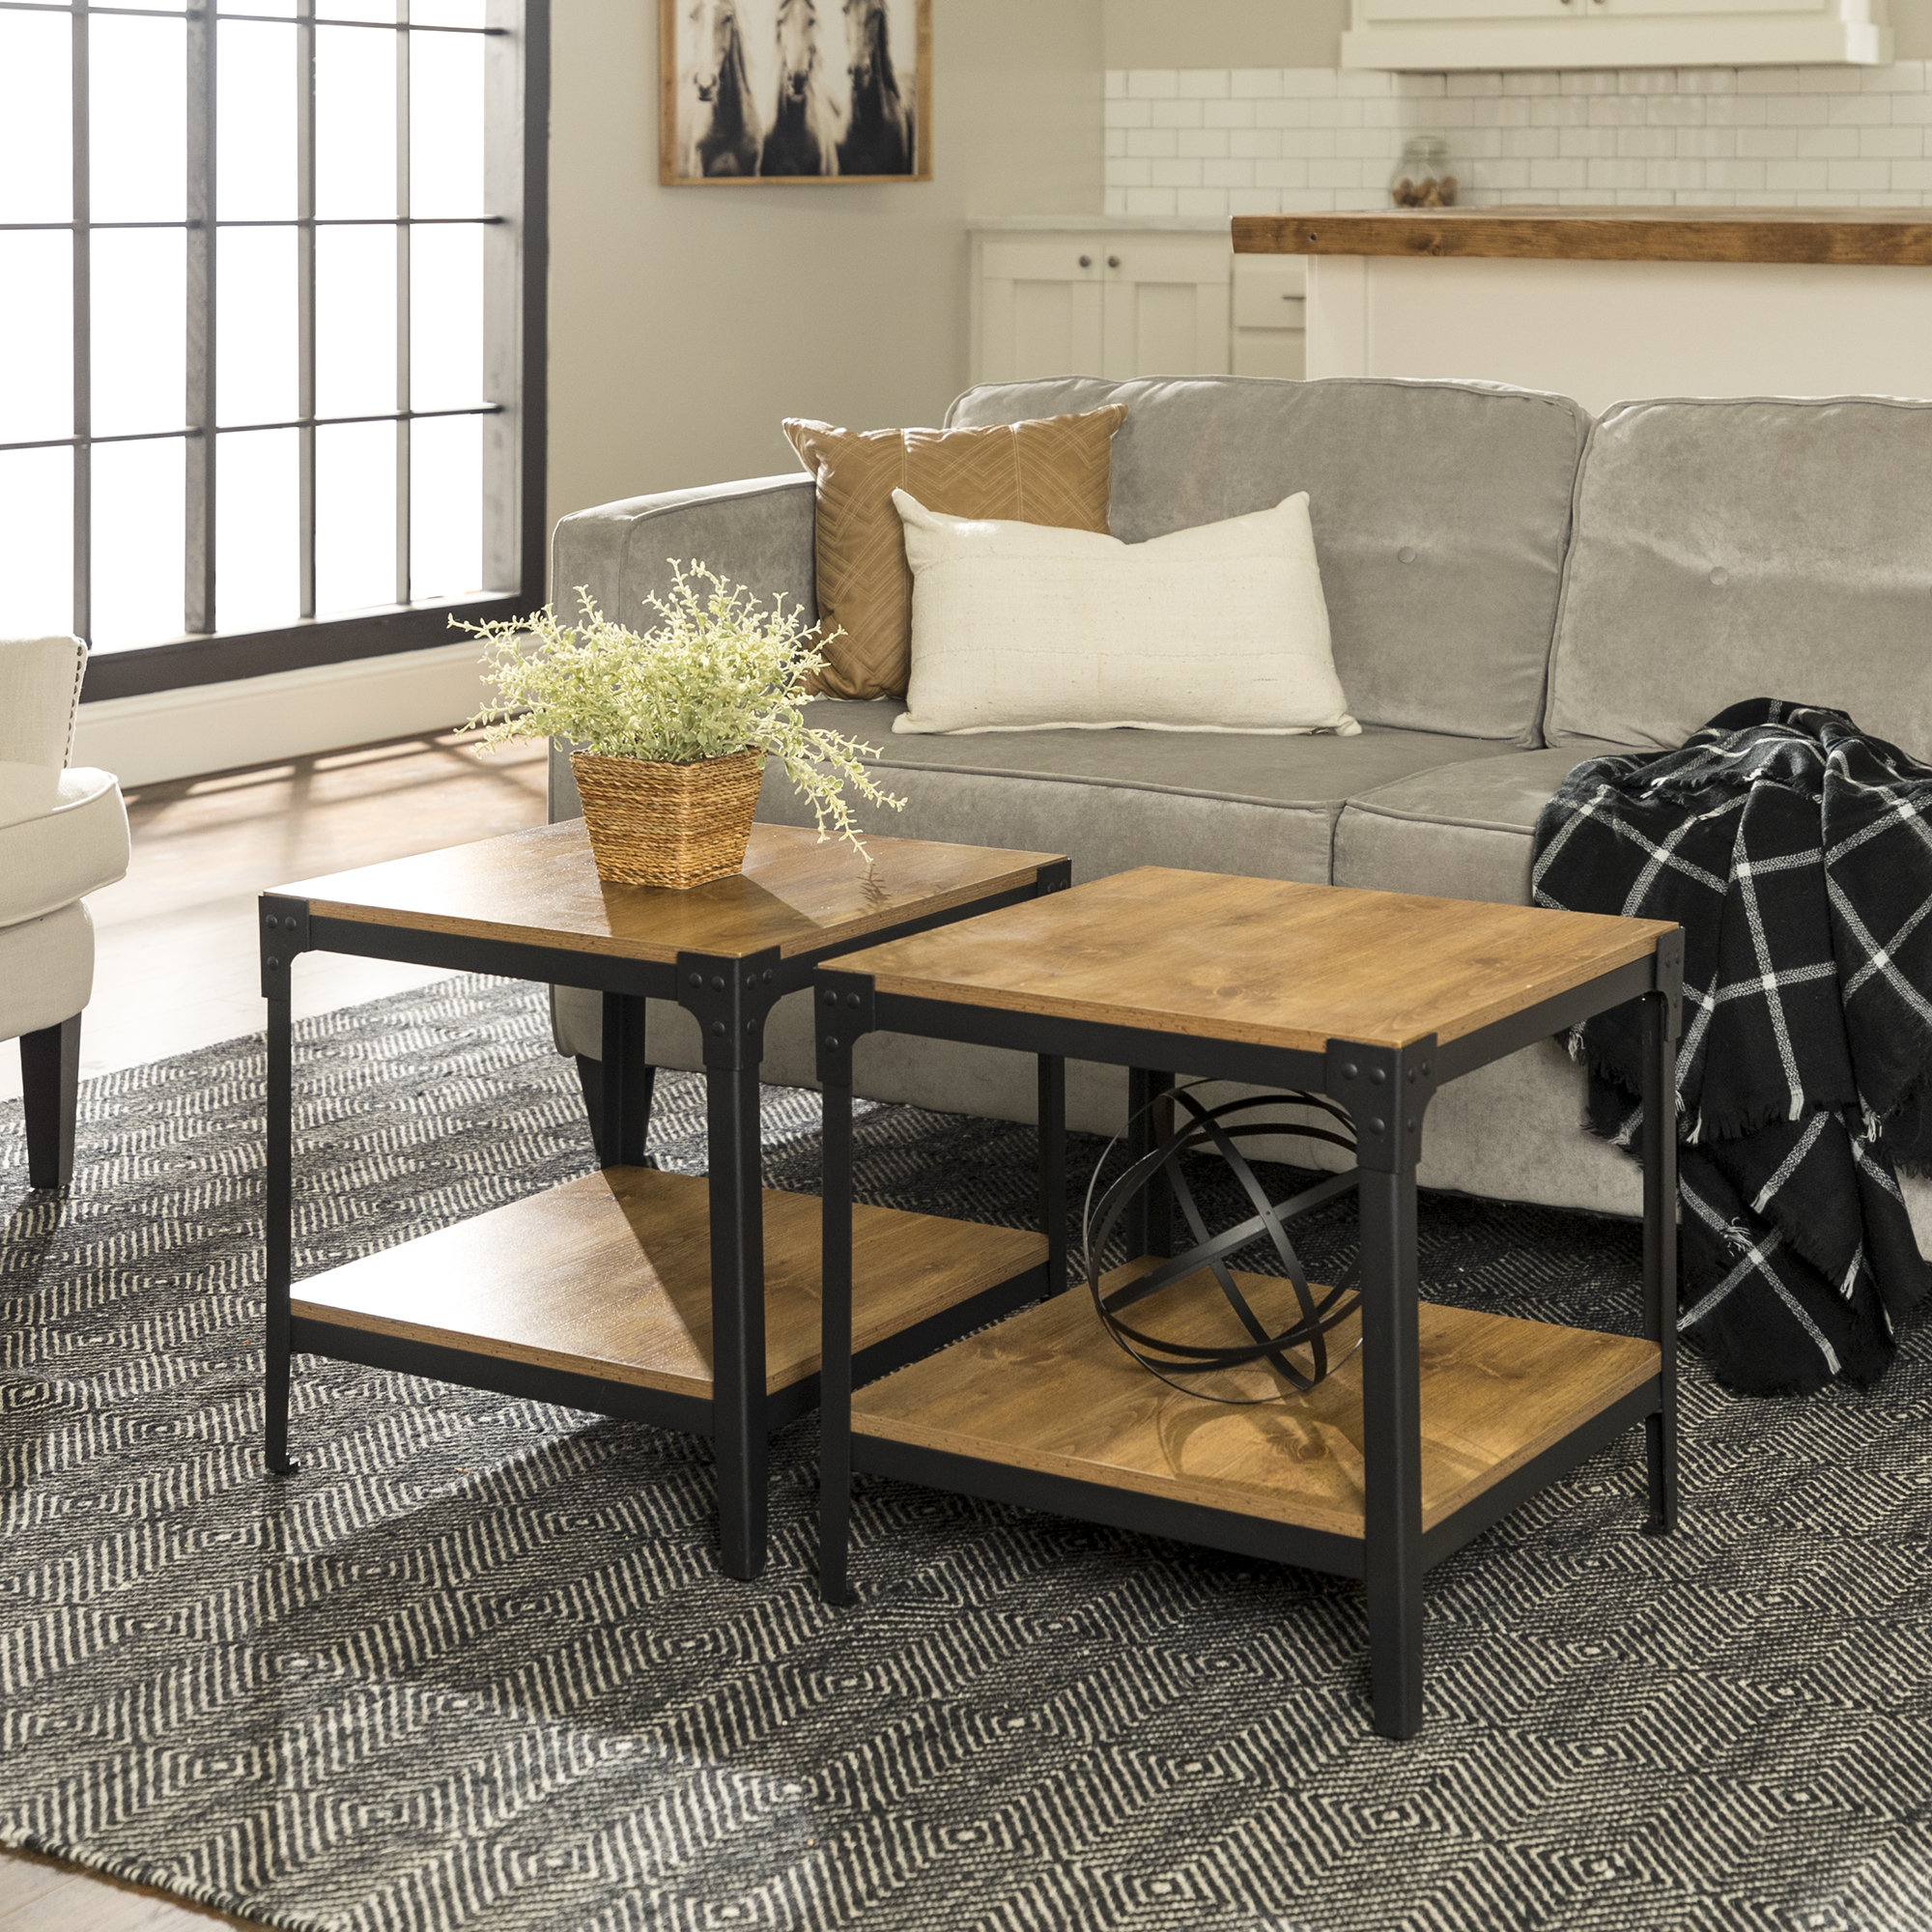 Greyleigh Cainsville End Table Set Reviews